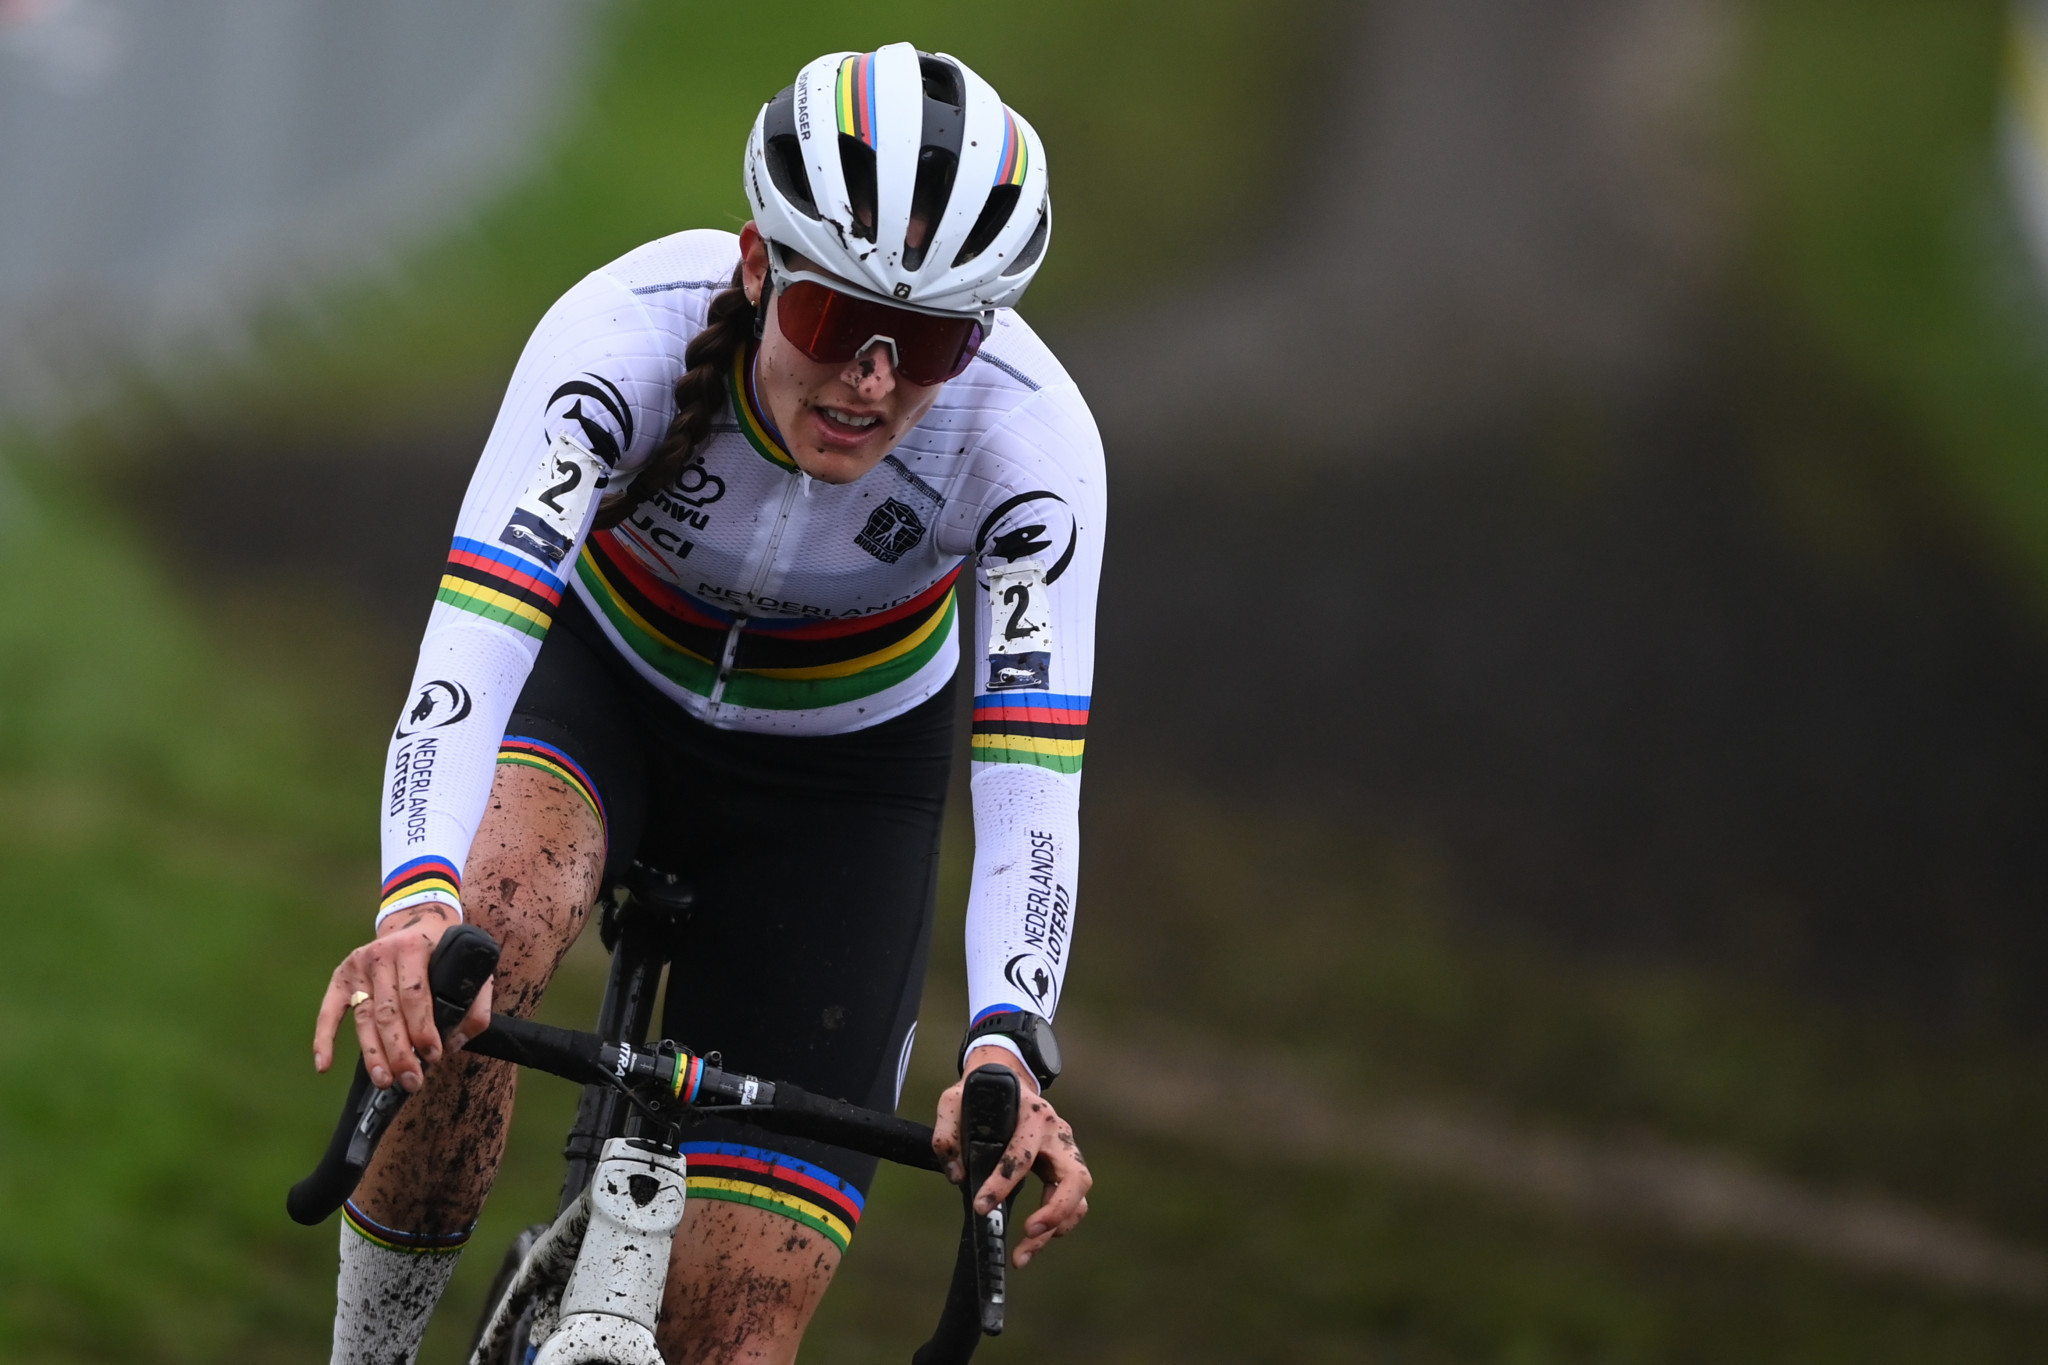 Van Aert and Brand break clear for Cyclo-cross World Cup wins in Dendermonde